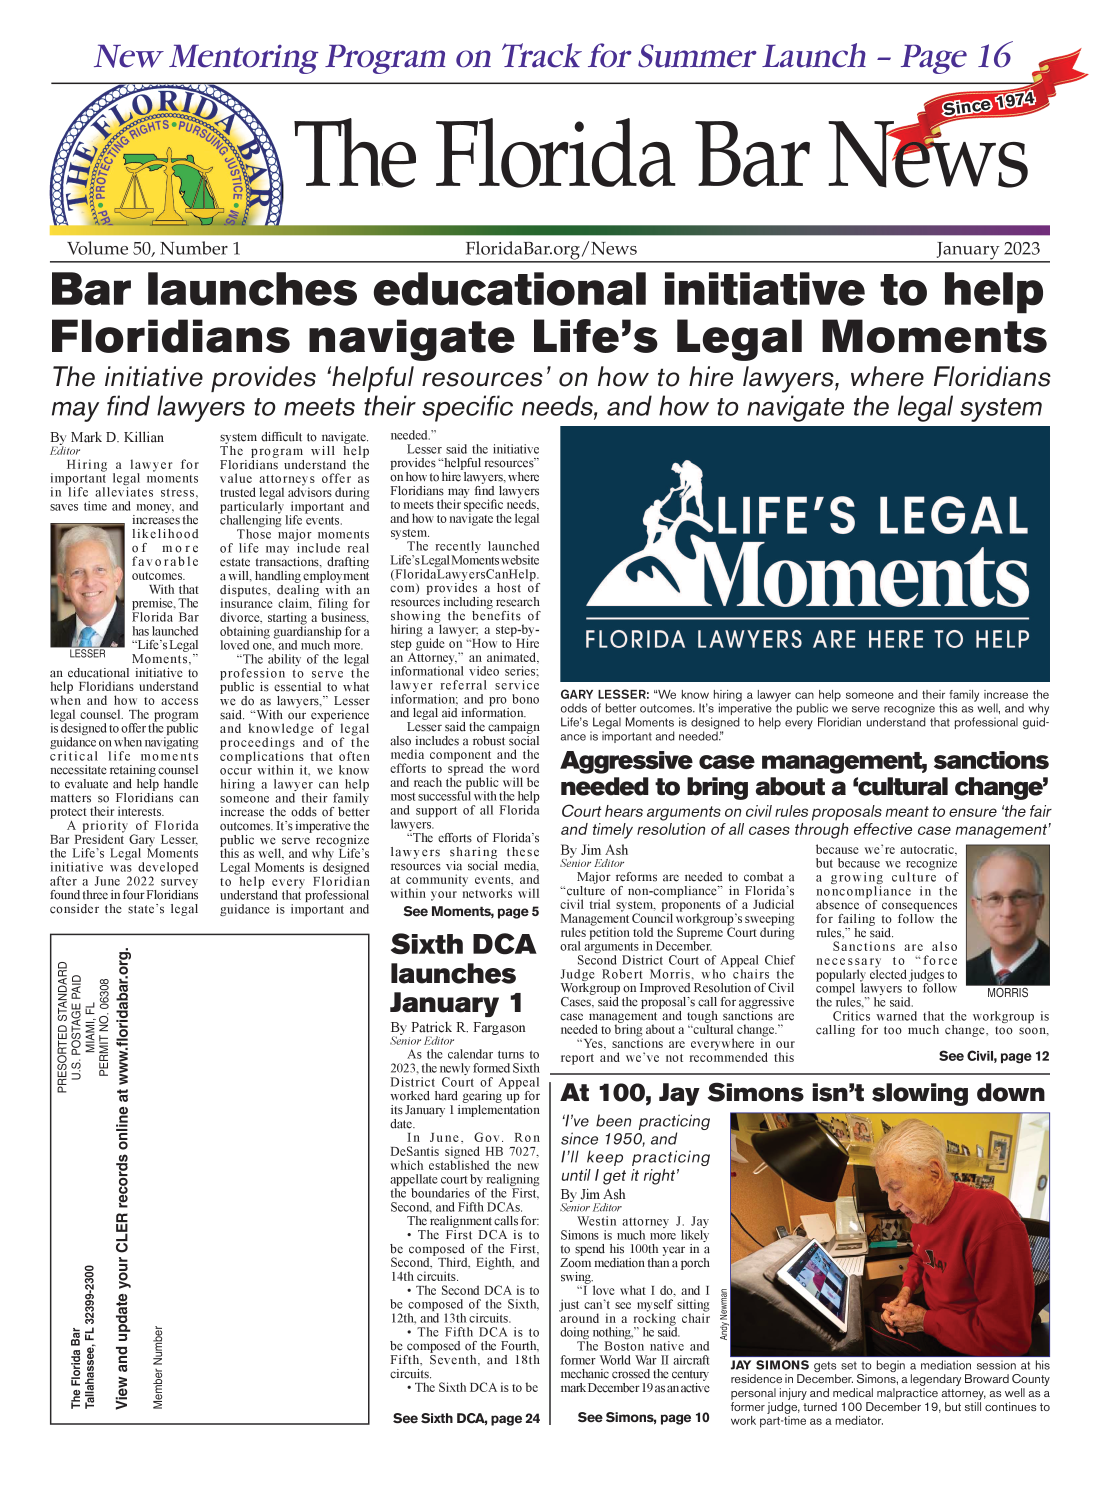 handle is hein.barjournals/flabn0050 and id is 1 raw text is: 



New Men toring Program on Track for Summer Launch - Page 16



                                                                                 a                                         SinceBa97


arTecForia Brn


Volume 50,   Number 1


FloridaBar.org   /News


January   2023


Bar launches educational initiative to help


Floridians navigate Life's Legal Moments

The initiative provides 'helpful resources' on how to hire lawyers, where Floridians

may find lawyers to meets their specific needs, and how to navigate the legal system


By Mark D. Killian
Editor
  Hiring  a lawyer for
important legal moments
in life alleviates stress,
saves time and money, and
            increases the
            likelihood
            of  more
            favorable
            outcomes.
              With that
            premise, The
            Florida Bar
    k       has launched
            LLife's Legal
   LESSER   Moments,
an educational initiative to
help Floridians understand
when and how  to access
legal counsel. The program
is designed to offer the public
guidance on when navigating
critical life moments
necessitate retaining counsel
to evaluate and help handle
matters so Floridians can
protect their interests.
  A  priority of Florida
Bar President Gary Lesser,
the Life's Legal Moments
initiative was developed
after a June 2022 survey
found three in four Floridians
consider the state's legal


system difficult to navigate.
The  program will help
Floridians understand the
value attorneys offer as
trusted legal advisors during
particularly important and
challenging life events.
  Those major moments
of life may include real
estate transactions, drafting
a will, handling employment
disputes, dealing with an
insurance claim, filing for
divorce, starting a business,
obtaining guardianship for a
loved one, and much more.
  The ability of the legal
profession to serve the
public is essential to what
we do as lawyers, Lesser
said. With our experience
and knowledge  of legal
proceedings and of the
complications that often
occur within it, we know
hiring a lawyer can help
someone and their family
increase the odds of better
outcomes. It's imperative the
public we serve recognize
this as well, and why Life's
Legal Moments is designed
to help every Floridian
understand that professional
guidance is important and


needed.
   Lesser said the initiative
provides helpful resources
on how to hire lawyers, where
Floridians may find lawyers
to meets their specific needs,
and how to navigate the legal
system.
   The recently launched
Life's Legal Moments website
(FloridaLawyersCanHelp.
com) provides a host of
resources including research
showing the benefits of
hiring a lawyer; a step-by-
step guide on How to Hire
an Attorney, an animated,
informational video series;
lawyer referral service
information; and pro bono
and legal aid information.
   Lesser said the campaign
also includes a robust social
media component and the
efforts to spread the word
and reach the public will be
most successful with the help
and support of all Florida
lawyers.
   The efforts of Florida's
lawyers  sharing these
resources via social media,
at community events, and
within your networks will
  See Moments,  page 5


Sixth DCA

launches

January 1
By Patrick R. Fargason
Senior Editor
   As the calendar turns to
2023, the newly formed Sixth
District Court of Appeal
worked hard gearing up for
its January 1 implementation
date.
   In June, Gov.  Ron
DeSantis signed HB 7027,
which established the new
appellate court by realigning
the boundaries of the First,
Second, and Fifth DCAs.
   The realignment calls for:
    The First DCA is to
be composed of the First,
Second, Third, Eighth, and
14th circuits.
   The Second DCA is to
be composed of the Sixth,
12th, and 13th circuits.
   The Fifth DCA is to
be composed of the Fourth,
Fifth, Seventh, and 18th
circuits.
   The Sixth DCA is to be

  See Sixth DCA, page 24


GARY  LESSER: We know hiring a lawyer can help someone and their family increase the
odds of better outcomes. It's imperative the public we serve recognize this as well, and why
Life's Legal Moments is designed to help every Floridian understand that professional guid-
ance is important and needed

Aggressive case management, sanctions

needed to bring about a 'cultural change'
Court  hears arguments  on civil rules proposals meant to ensure 'the fair
and  timely resolution of all cases through effective case management'


By Jim Ash
Senior Editor
  Major reforms are needed to combat a
culture of non-compliance in Florida's
civil trial system, proponents of a Judicial
Management Council workgroup's sweeping
rules petition told the Supreme Court during
oral arguments in December.
  Second District Court of Appeal Chief
Judge Robert Morris, who chairs the
Workgroup on Improved Resolution of Civil
Cases, said the proposal's call for aggressive
case management and tough sanctions are
needed to bring about a cultural change.
  Yes, sanctions are everywhere in our
report and we've not recommended this


because we're autocratic,
but because we recognize
a growing  culture of
noncompliance  in the
absence of consequences
for failing to follow the
rules, he said.
   Sanctions are also
necessary  to force
popularly elected judges to
compel lawyers to follow MORRIS
the rules, he said.
  Critics warned that the workgroup is
calling for too much change, too soon,

                  See Civil, page 12


At 100, Jay Simons isn't slowing down

I've been  practicing
since  1950, and
I'll keep  practicing
until I get it right'
By Jim Ash
Senior Editor
   Westin attorney J. Jay
Simons is much more likely
to spend his 100th year in a
Zoom mediation than a porch          ,
swing.
   I love what I do, and I g
just can't see myself sitting                   -
around in a rocking chairz'
doing nothing, he said.   Q
   The Boston native and
former World War II aircraft  JAY SIMONS gets set to begin a mediation session at his
mechanic crossed the century  residence in December. Simons, a legendary Broward County
      mar Deembr lasaactve ersonal iniurv and medical malpractice attorney as well as a


See Simons, page 10


peroa  inuy aumuia    aprat   ato   y,   aswnaa
former judge, turned 100 December 19, but still continues to
work part-time as a mediator.


     w   0
     O
Zu  d
Qw       . t
0  H  Z
    w*6Qi _

         ca
         G)
         C
         0
         Co
         L-
         0
         C)


         w
         J
      O0
    No   >'
      0) -
    ~    (4-



  LL t-
      ,  G)   E
  Fe-    v


is
ry


